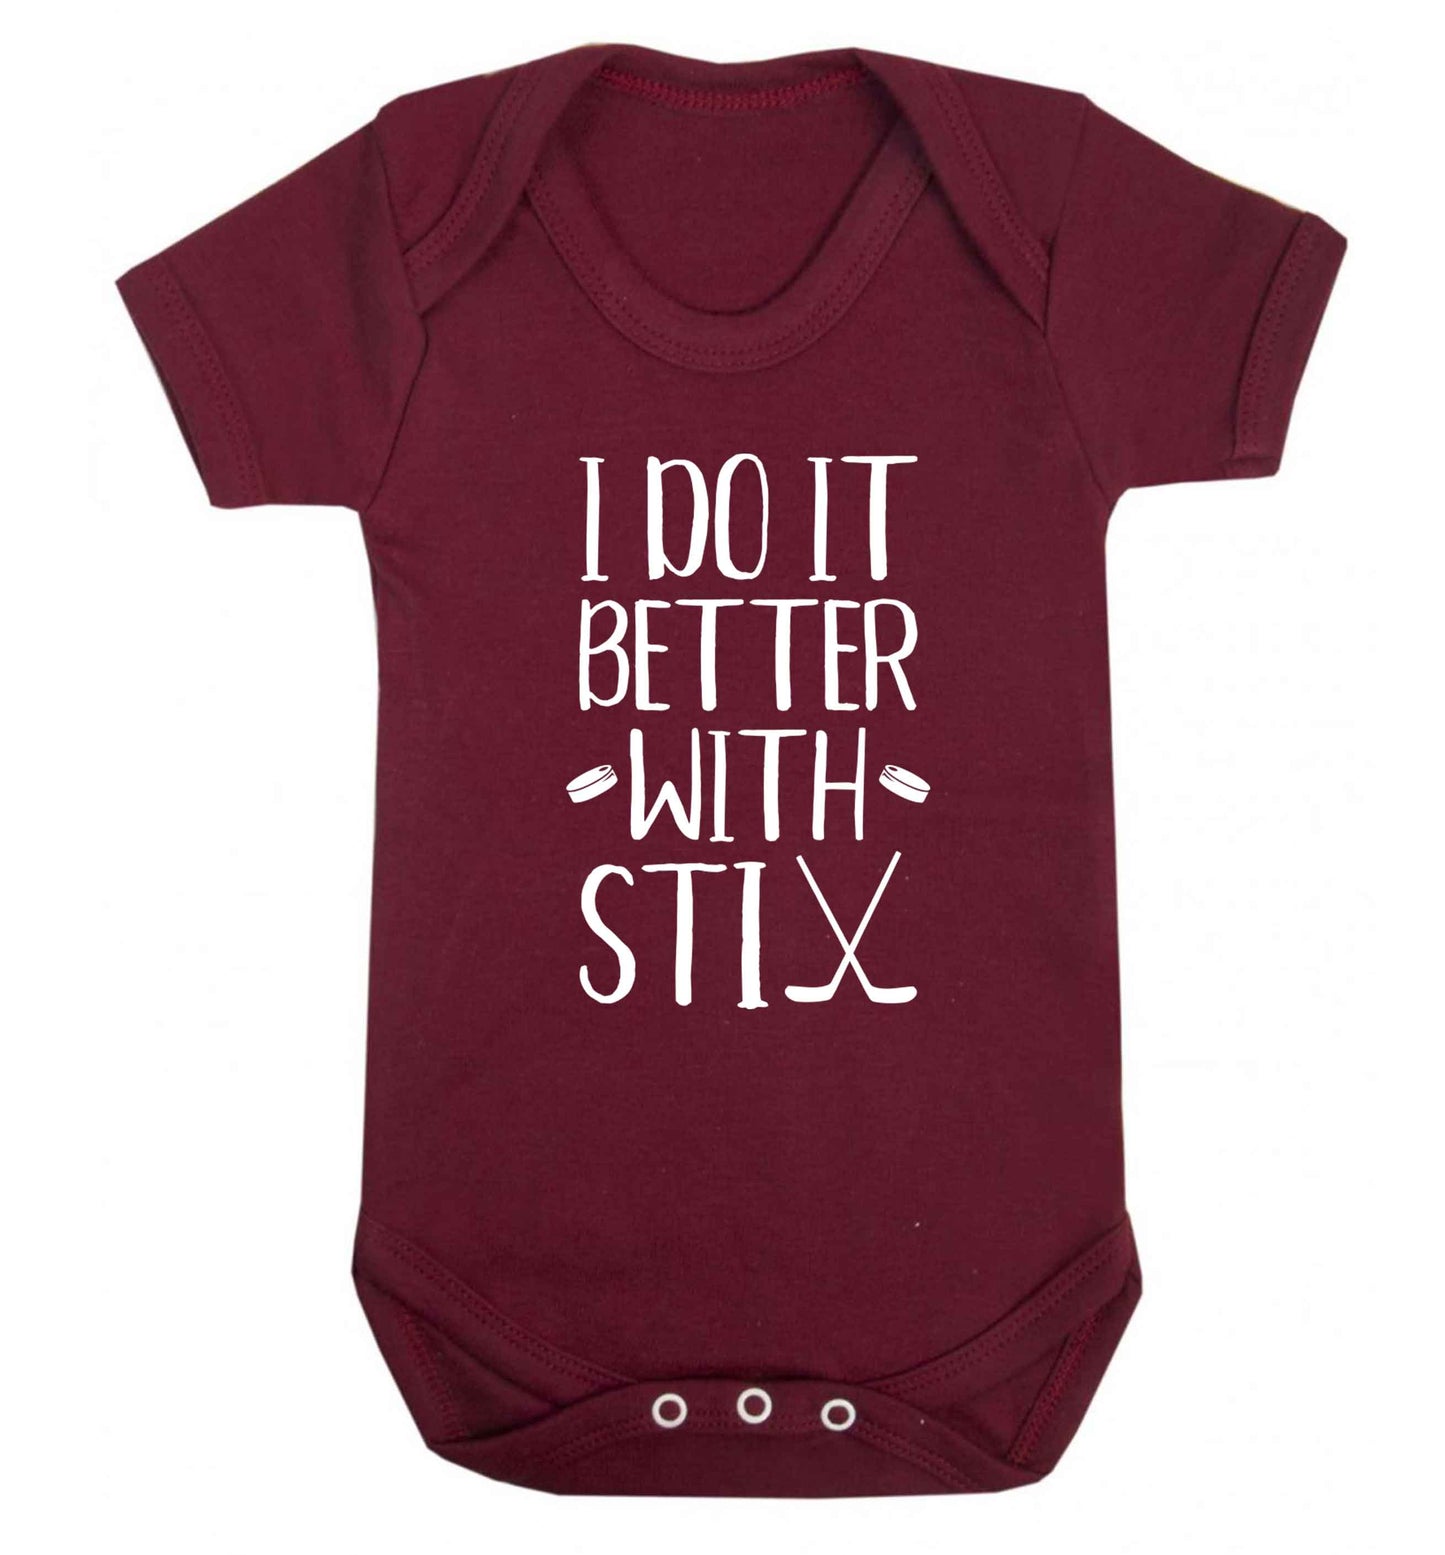 I do it better with stix (hockey) Baby Vest maroon 18-24 months